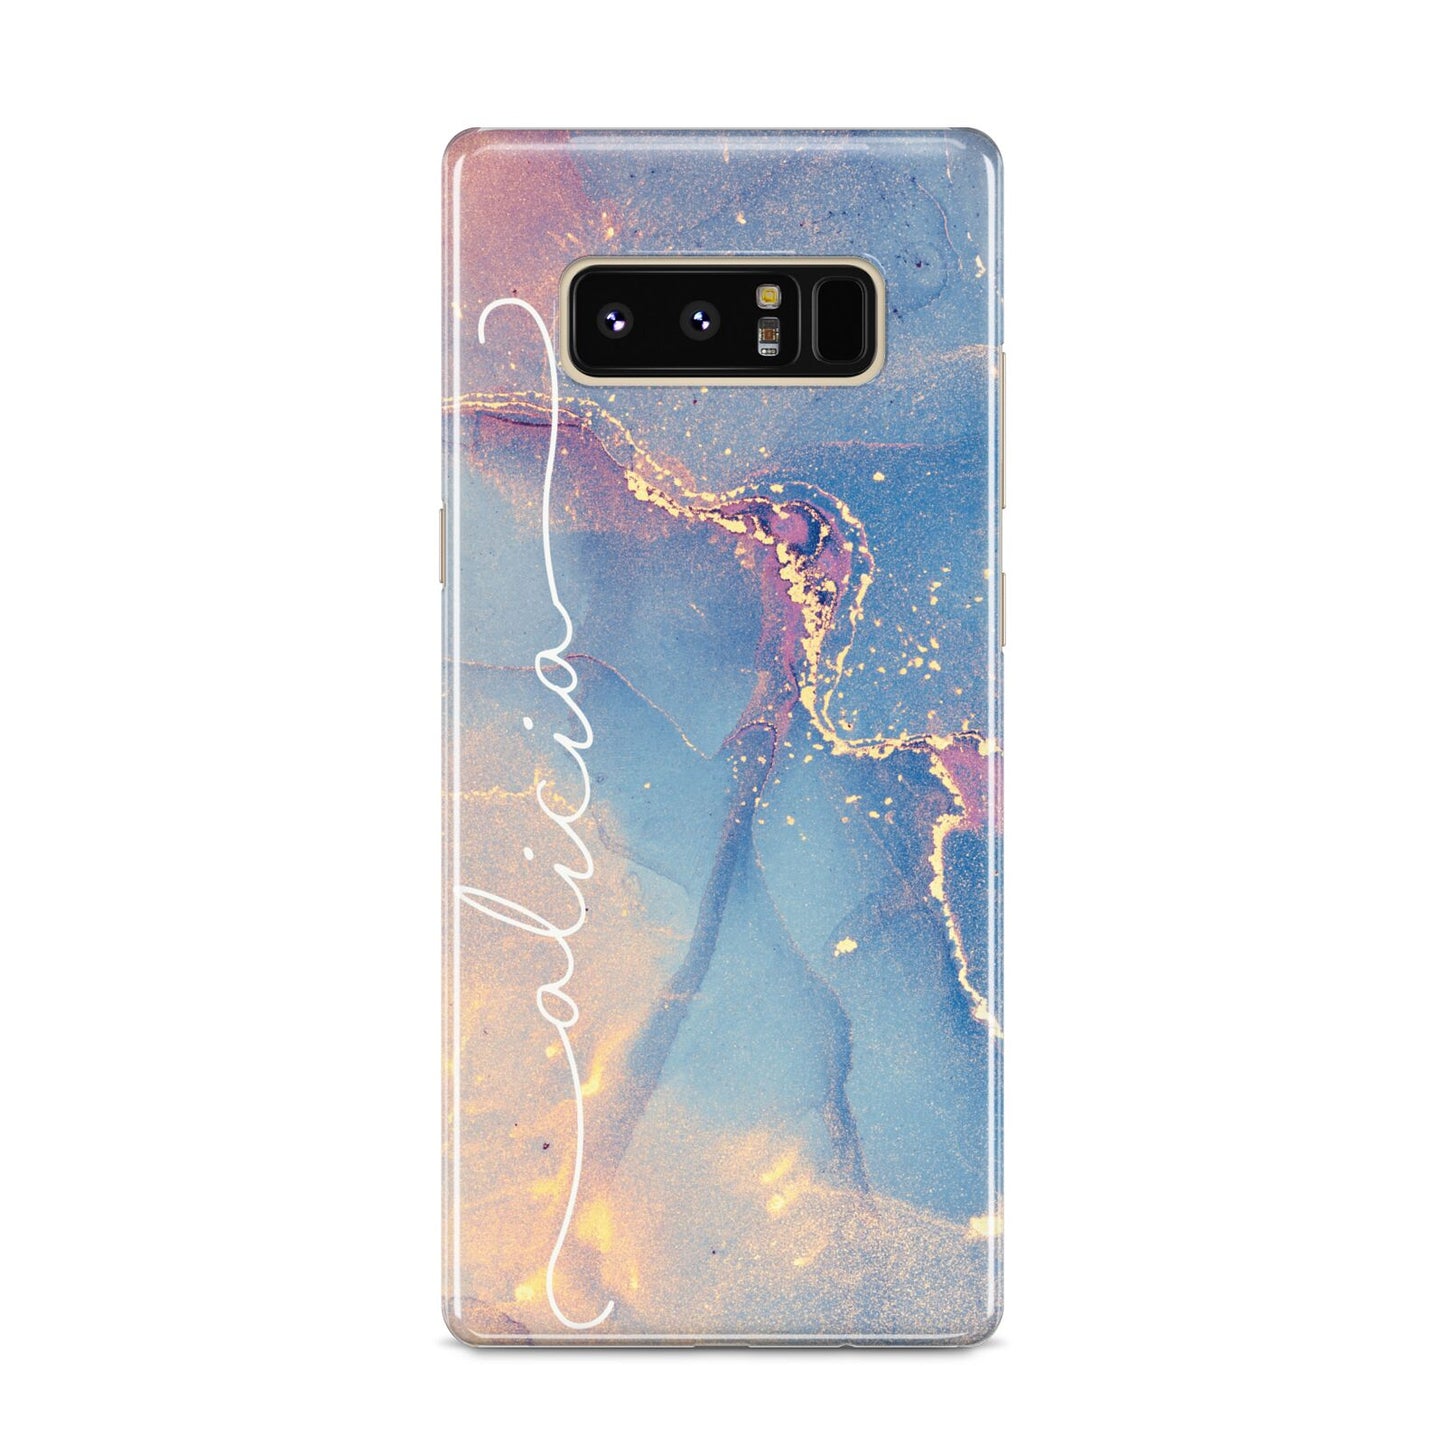 Blue and Pink Marble Samsung Galaxy S8 Case